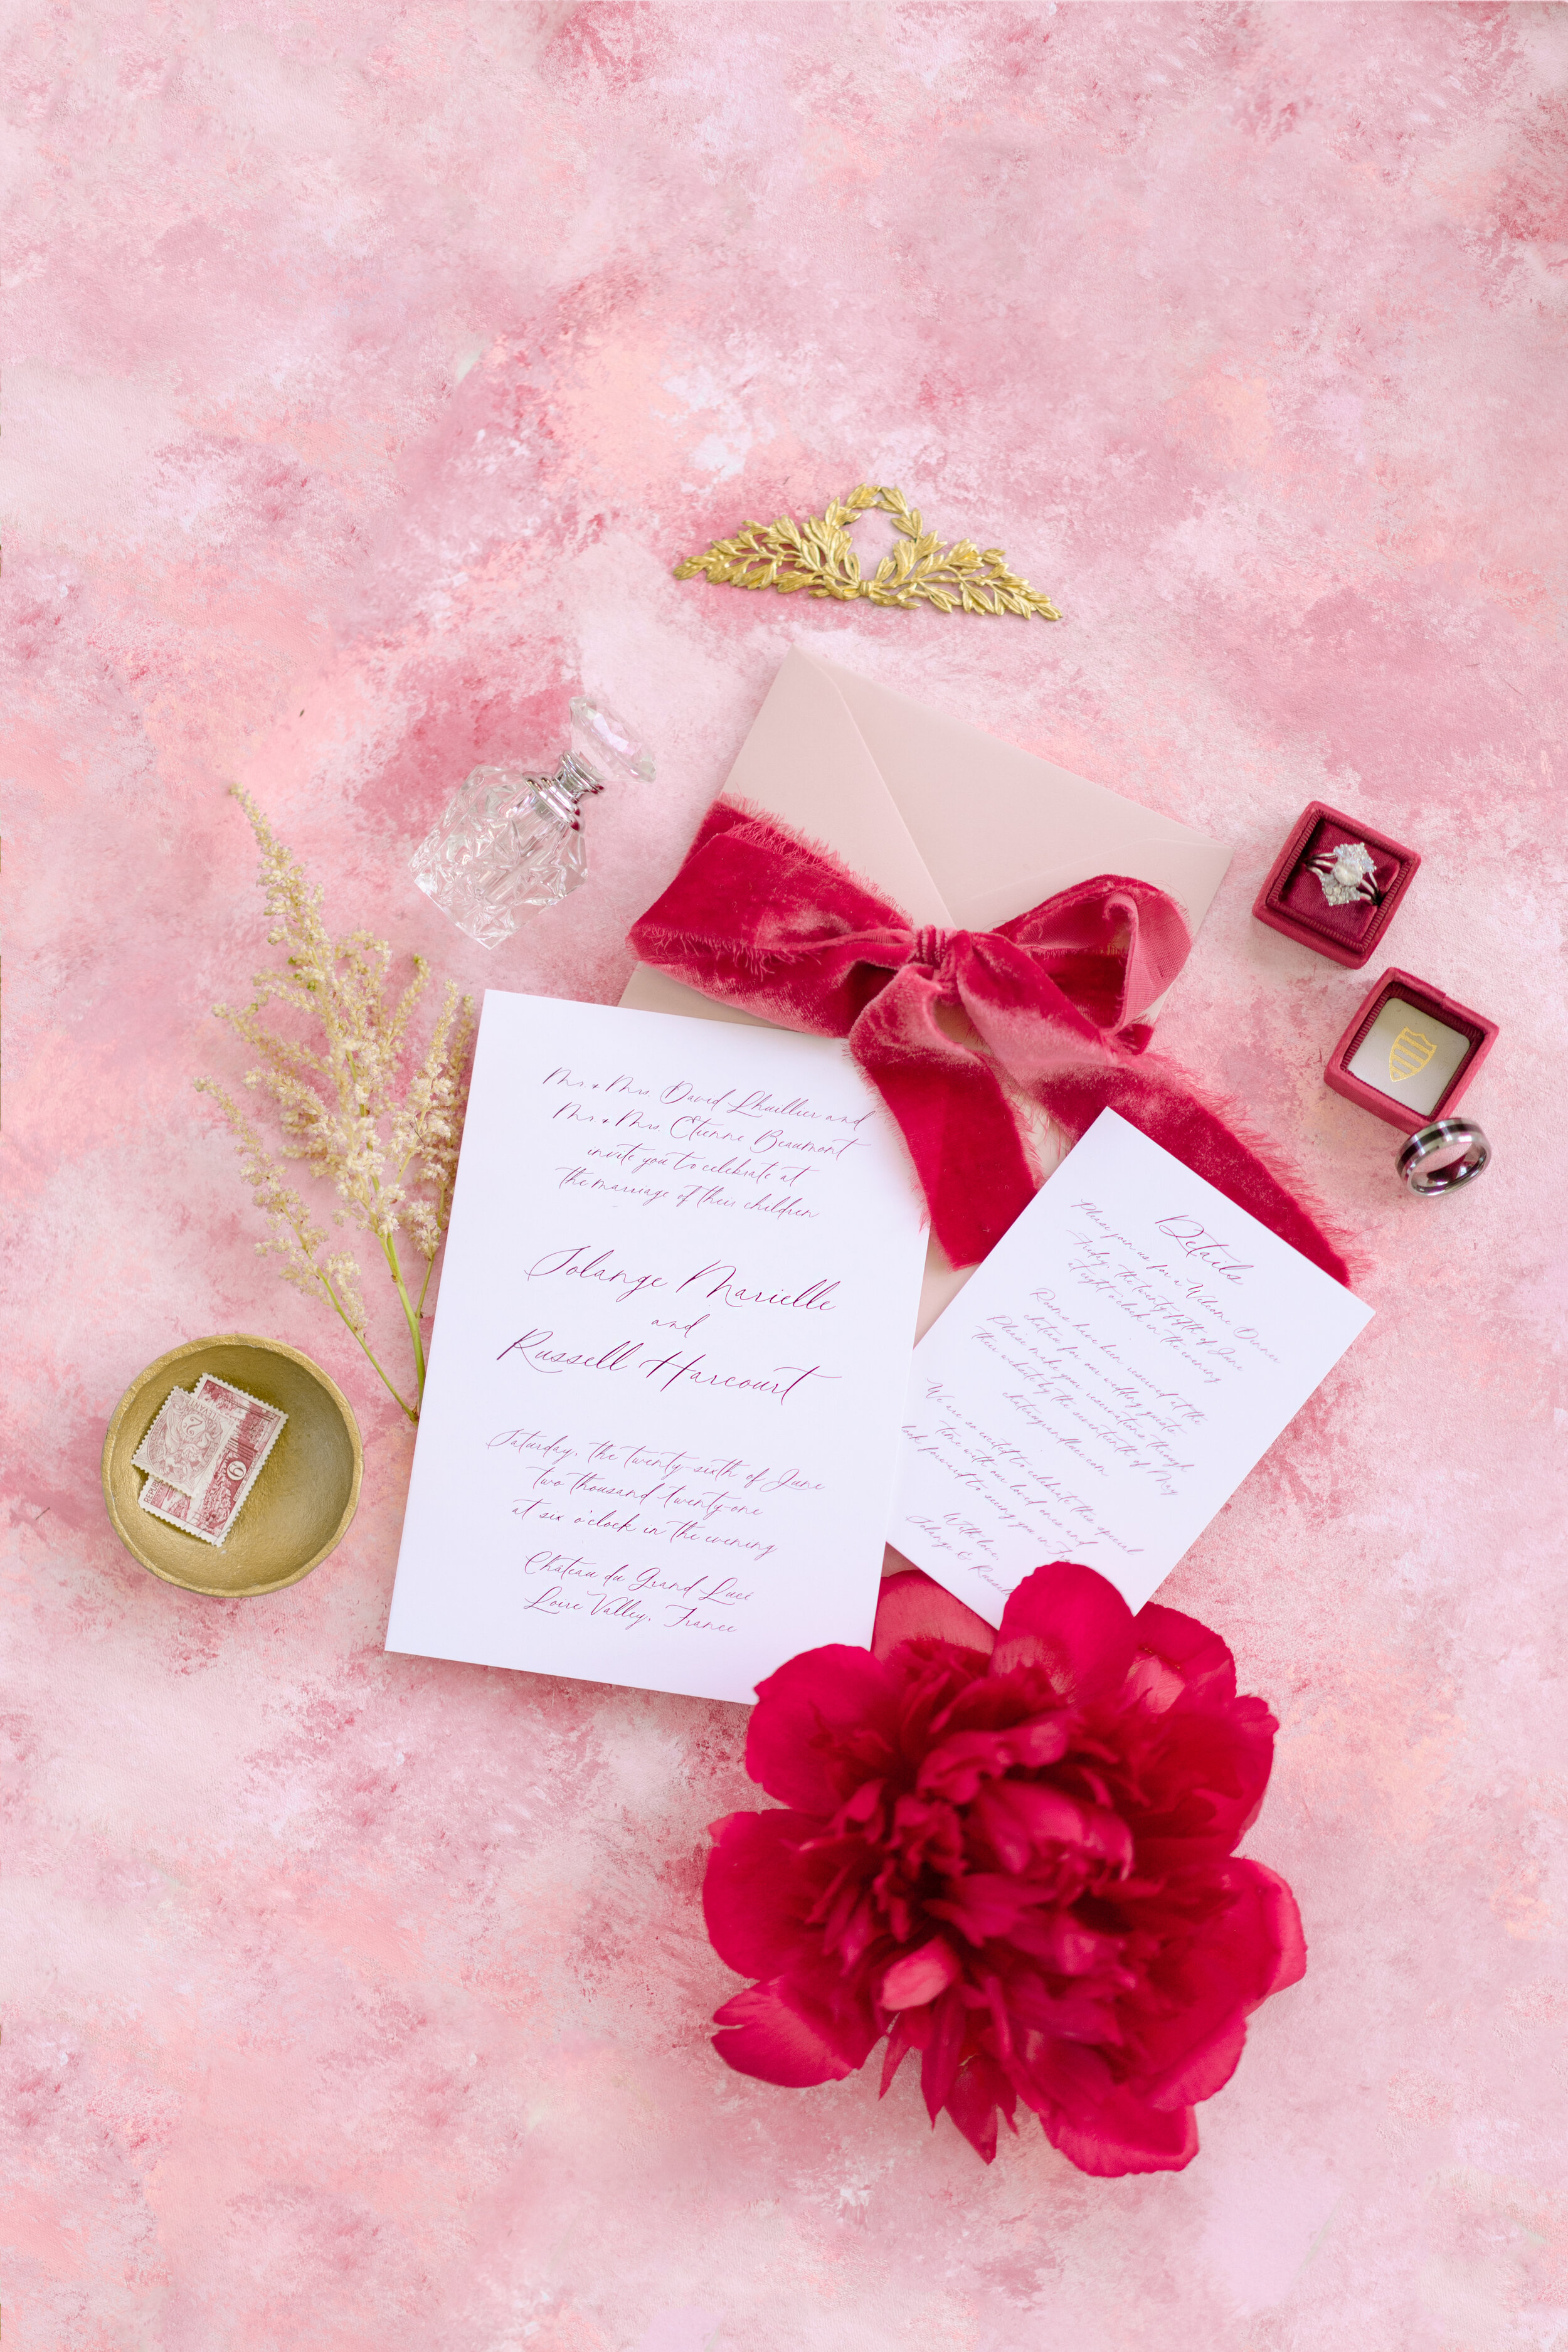 A Romantic Wedding Elopement Filled with Colorful Fuchsia - Sarahi Hadden Submission-131.jpg